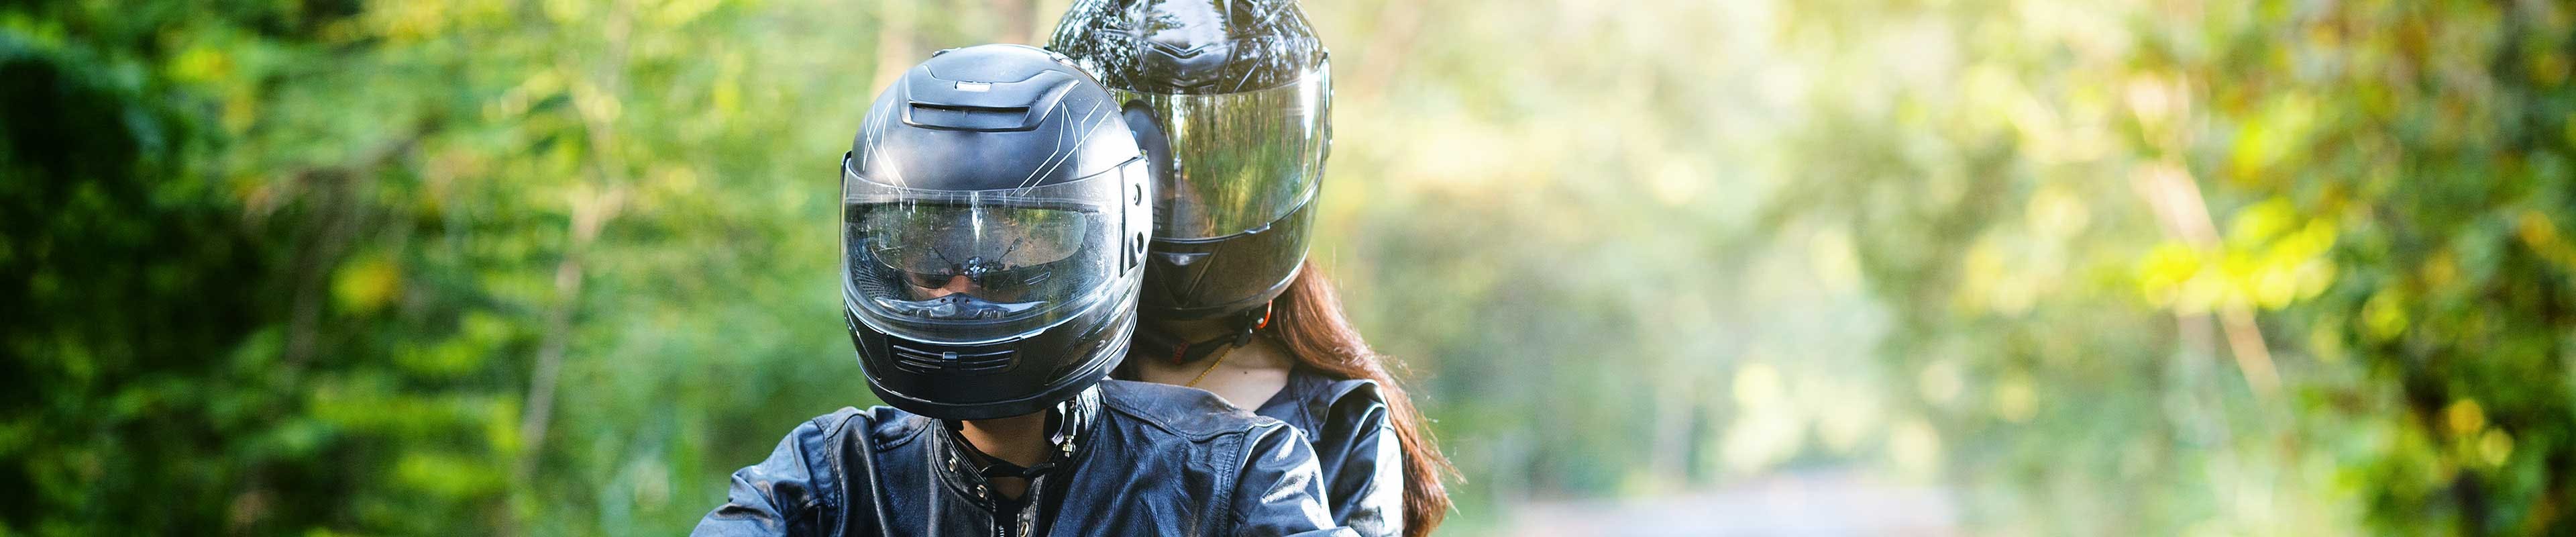 Couple riding motorcycle while wearing helmets